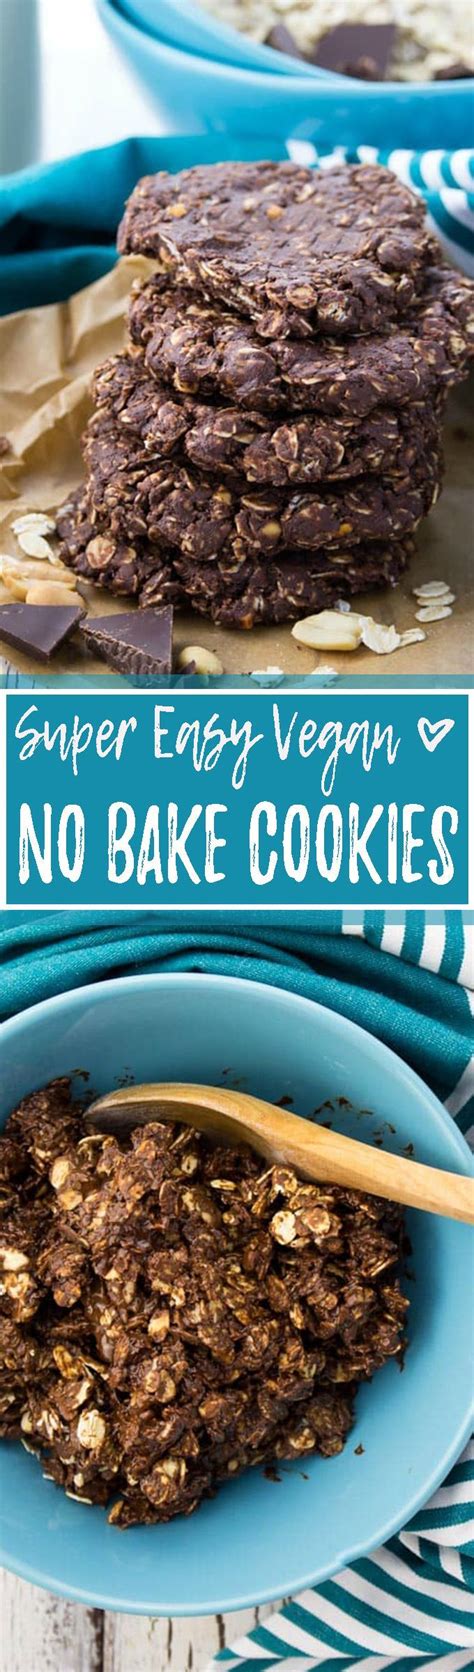 These Vegan No Bake Cookies With Chocolate And Peanut Butter Are